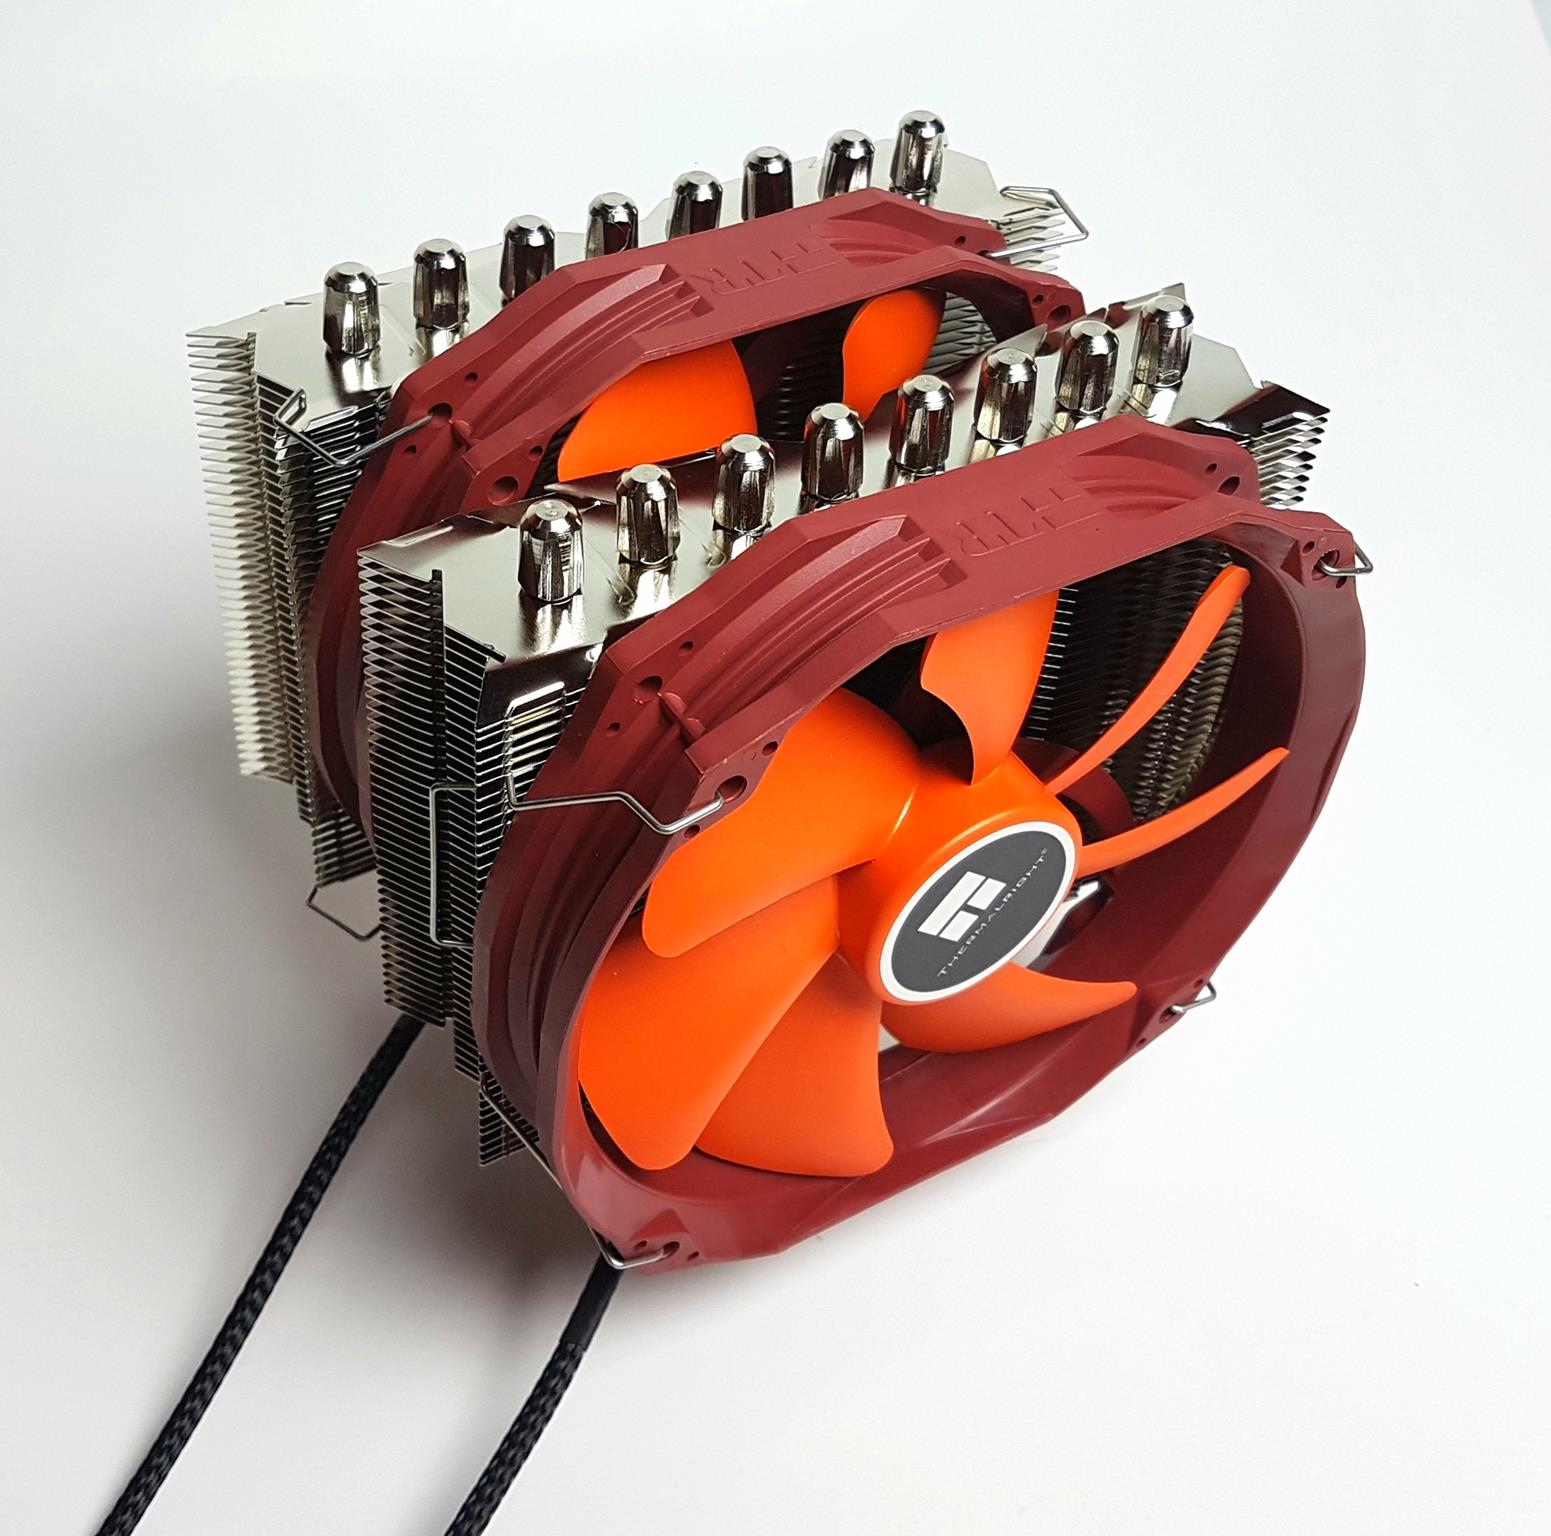 Thermalright Silver Arrow IB-E-Extreme Rev.B CPU Air Cooler Review